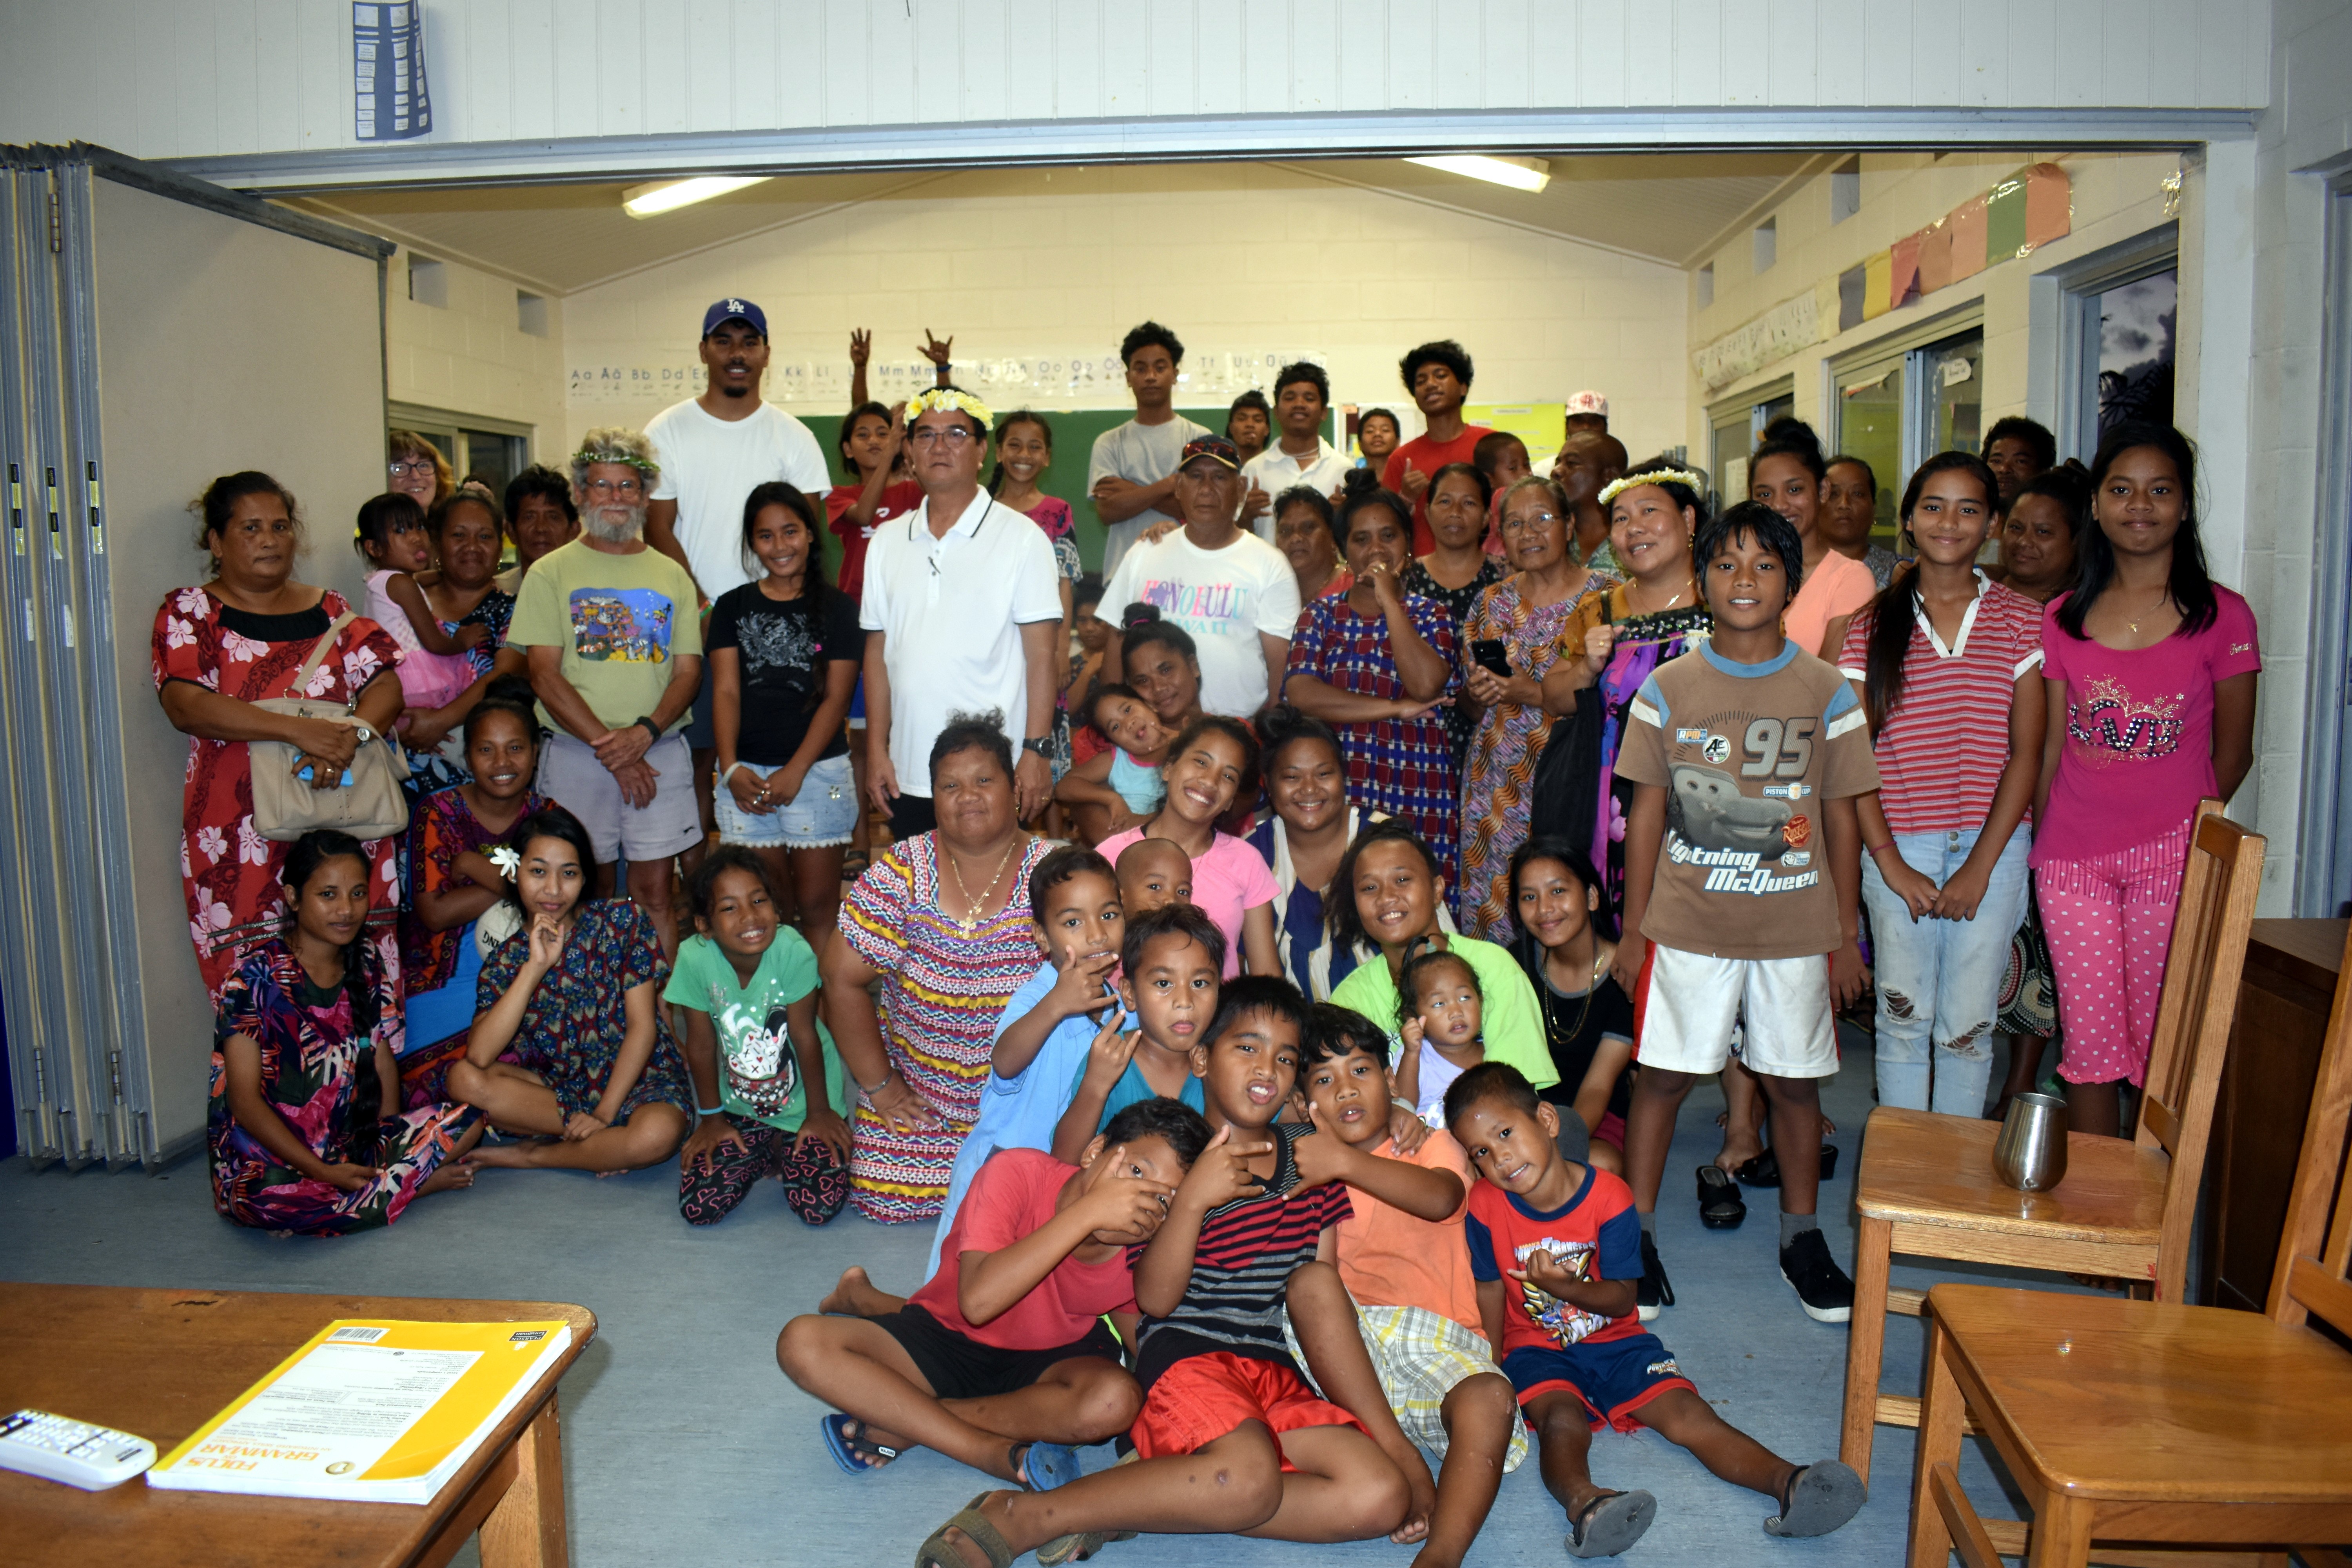 Several adults and children pose for an indoor group shot